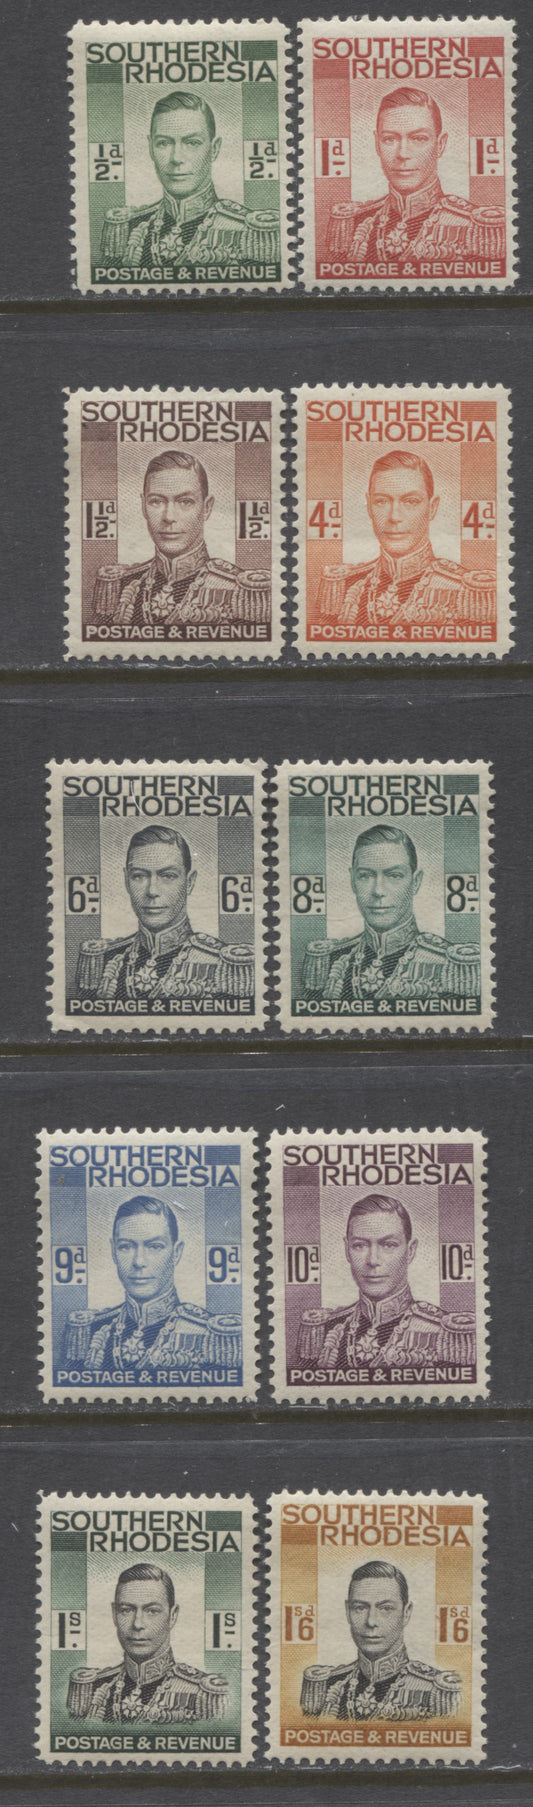 Lot 90 Southern Rhodesia SG#40-49, 1937 KGVI Pictorial Issue, A Partial Set Of VFNH Singles to the 1/6d, Perf 14, SG. Cat. 32.35 GBP = $55.47